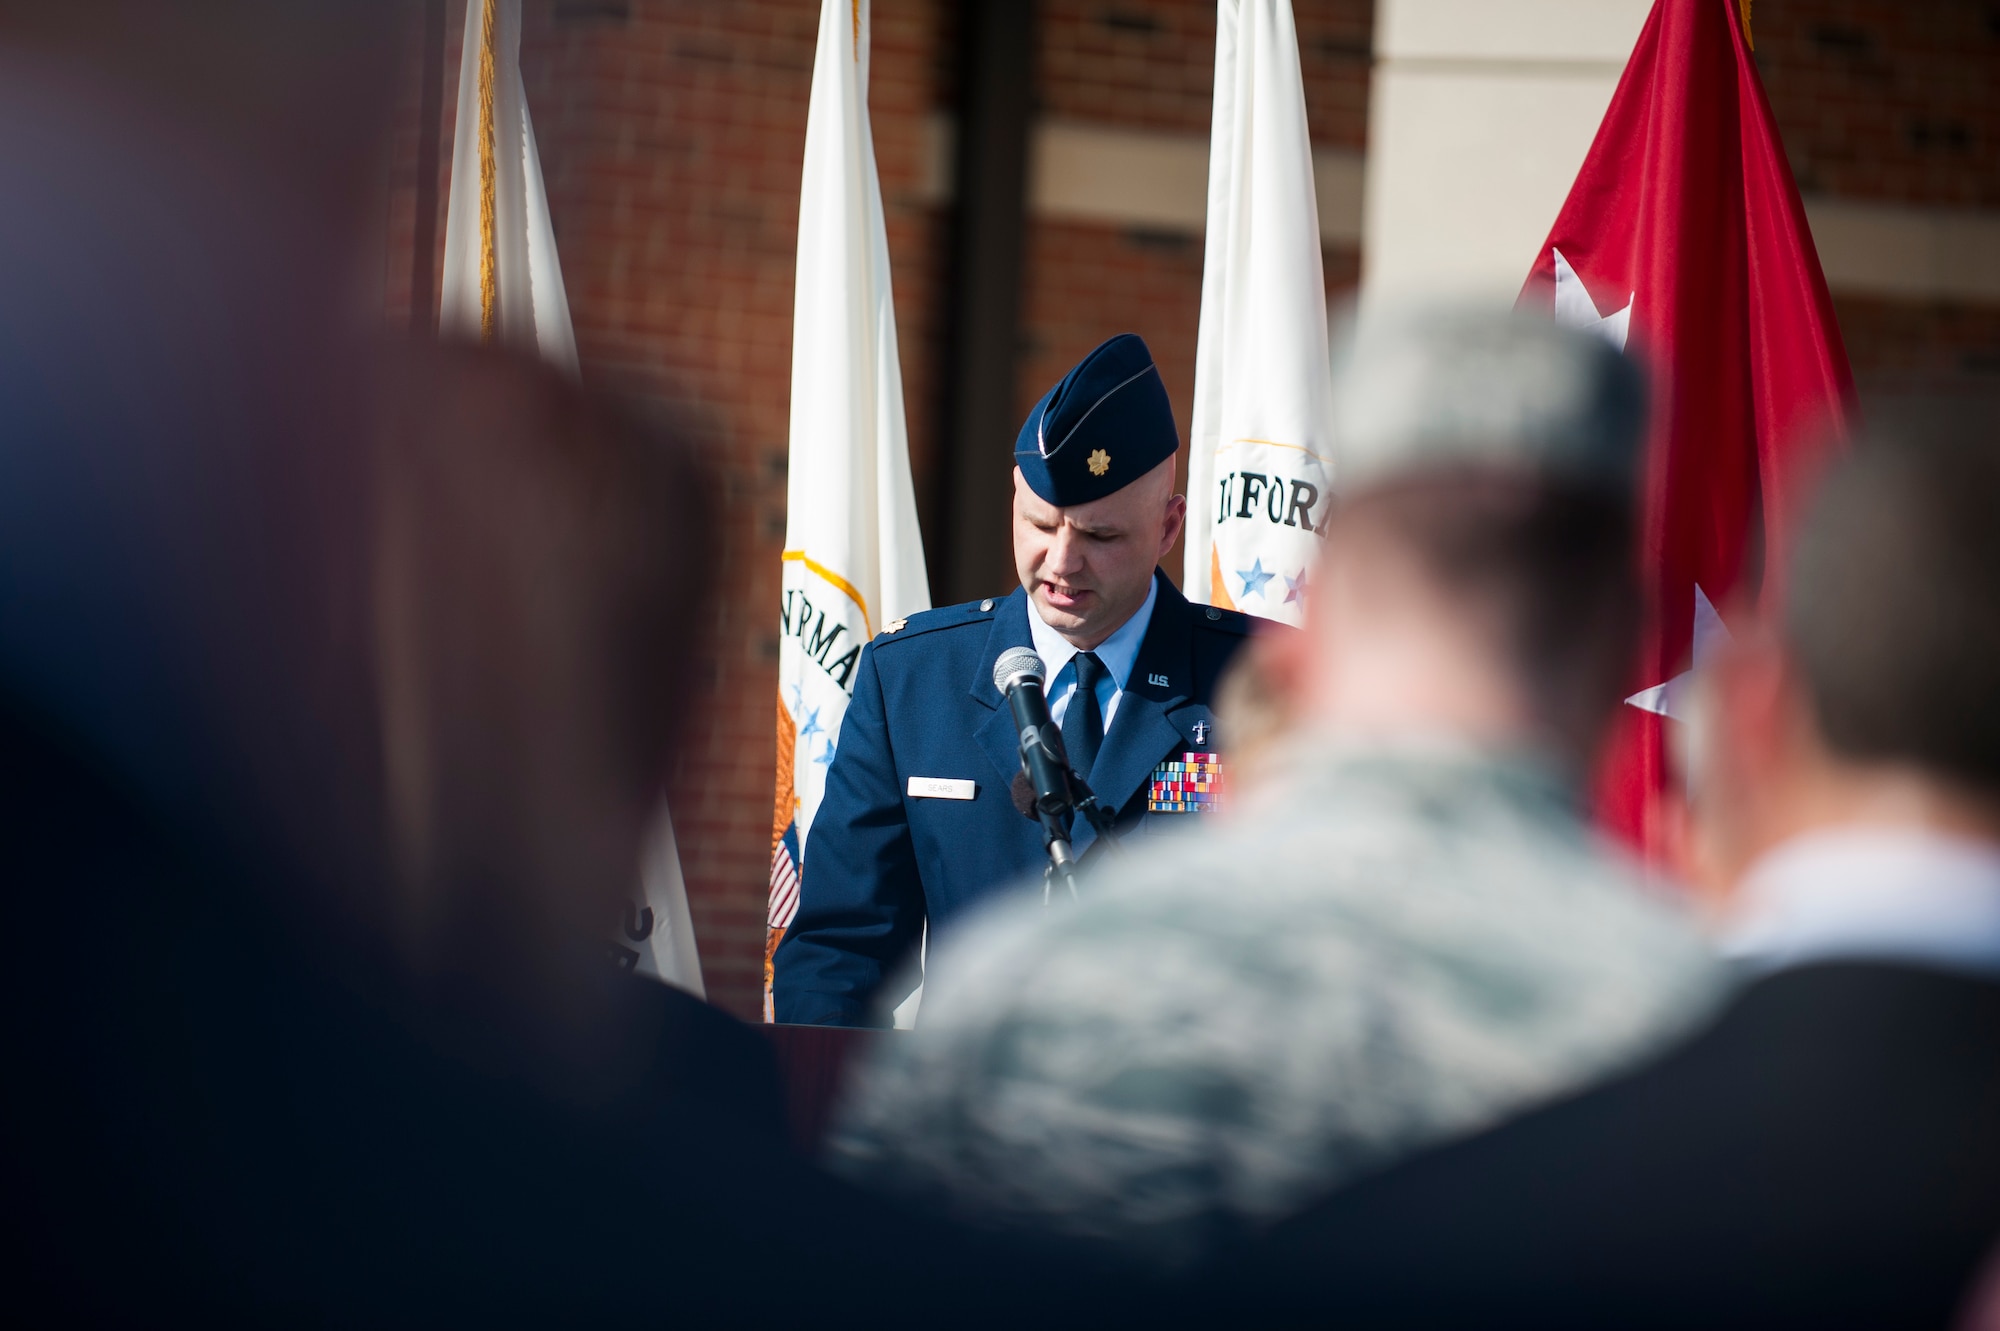 Maj. Travis Sears, 375th Air Mobility Wing chaplain, delivers an invocation during a ribbon cutting ceremony for the new Defense Information Systems Agency compound at Scott Air Force Base, Ill., Aug. 11, 2016. The 164,000 sq. ft. complex includes a wellness center with fitness equipment and locker space available to DISA employees 24 hours a day. (U.S. Air Force photo by Staff Sgt. Clayton Lenhardt/Released)